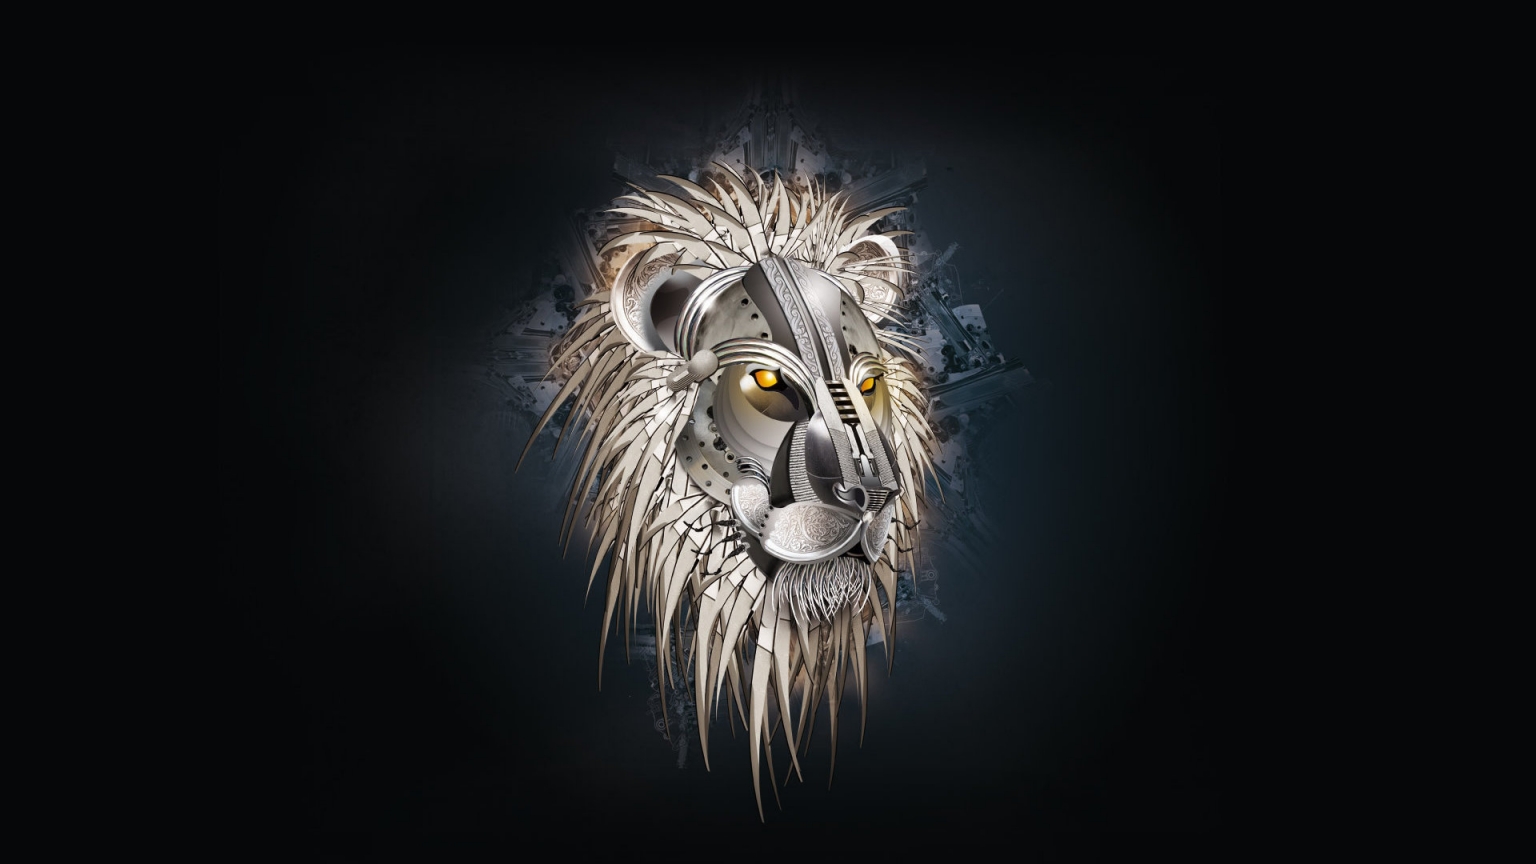 Lion head drawing for 1536 x 864 HDTV resolution